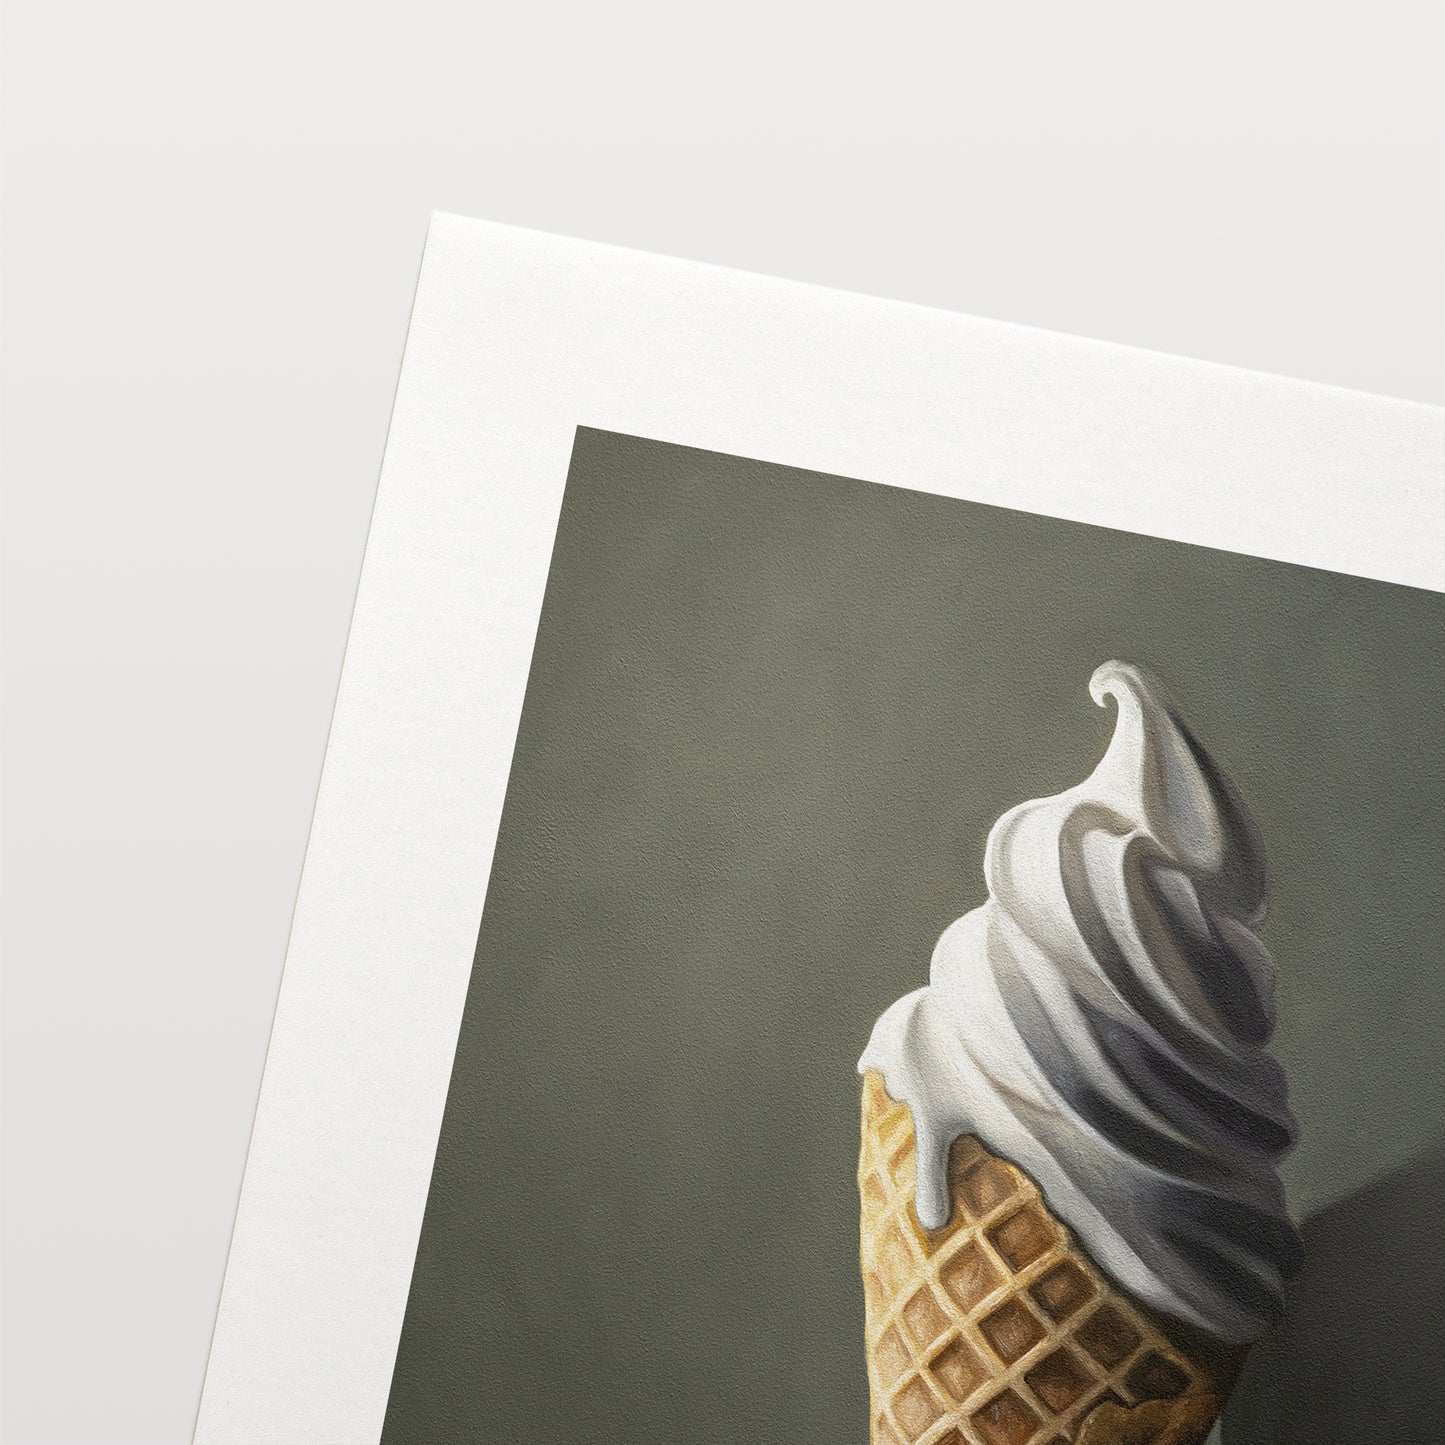 The artwork features a waffle cone packed with a plentiful portion of creamy vanilla ice cream.